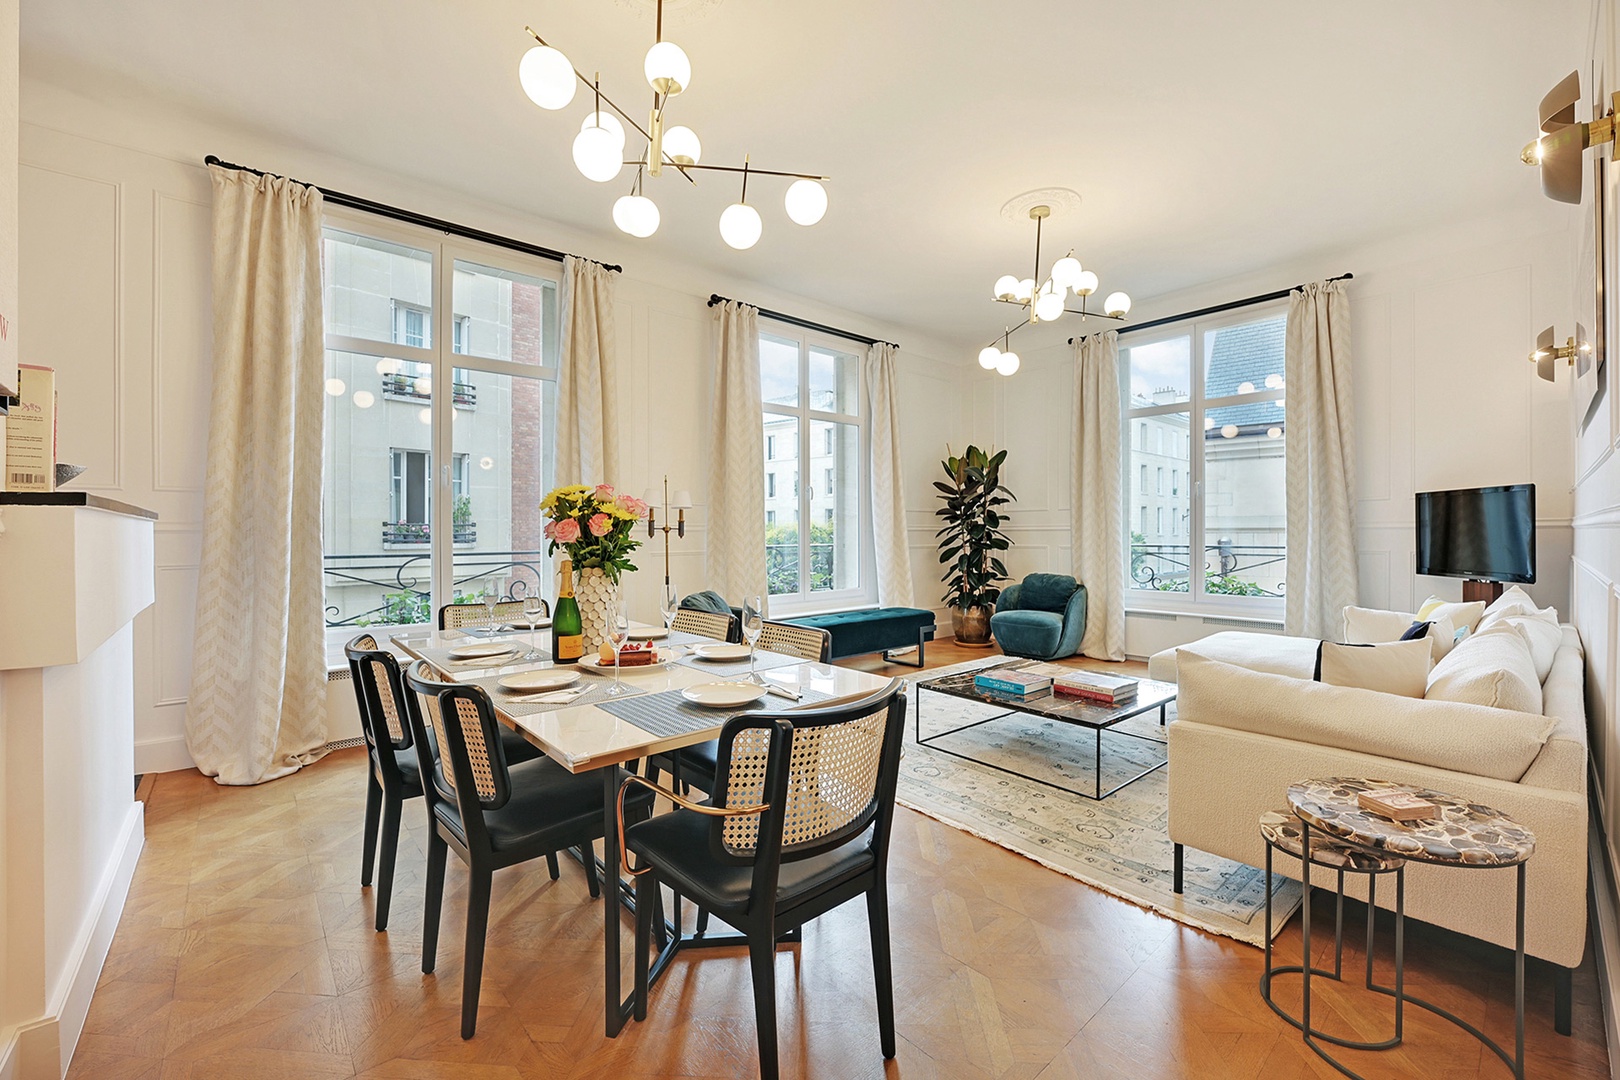 Feel right at home in Paris in a stylish and historic neighborhood.